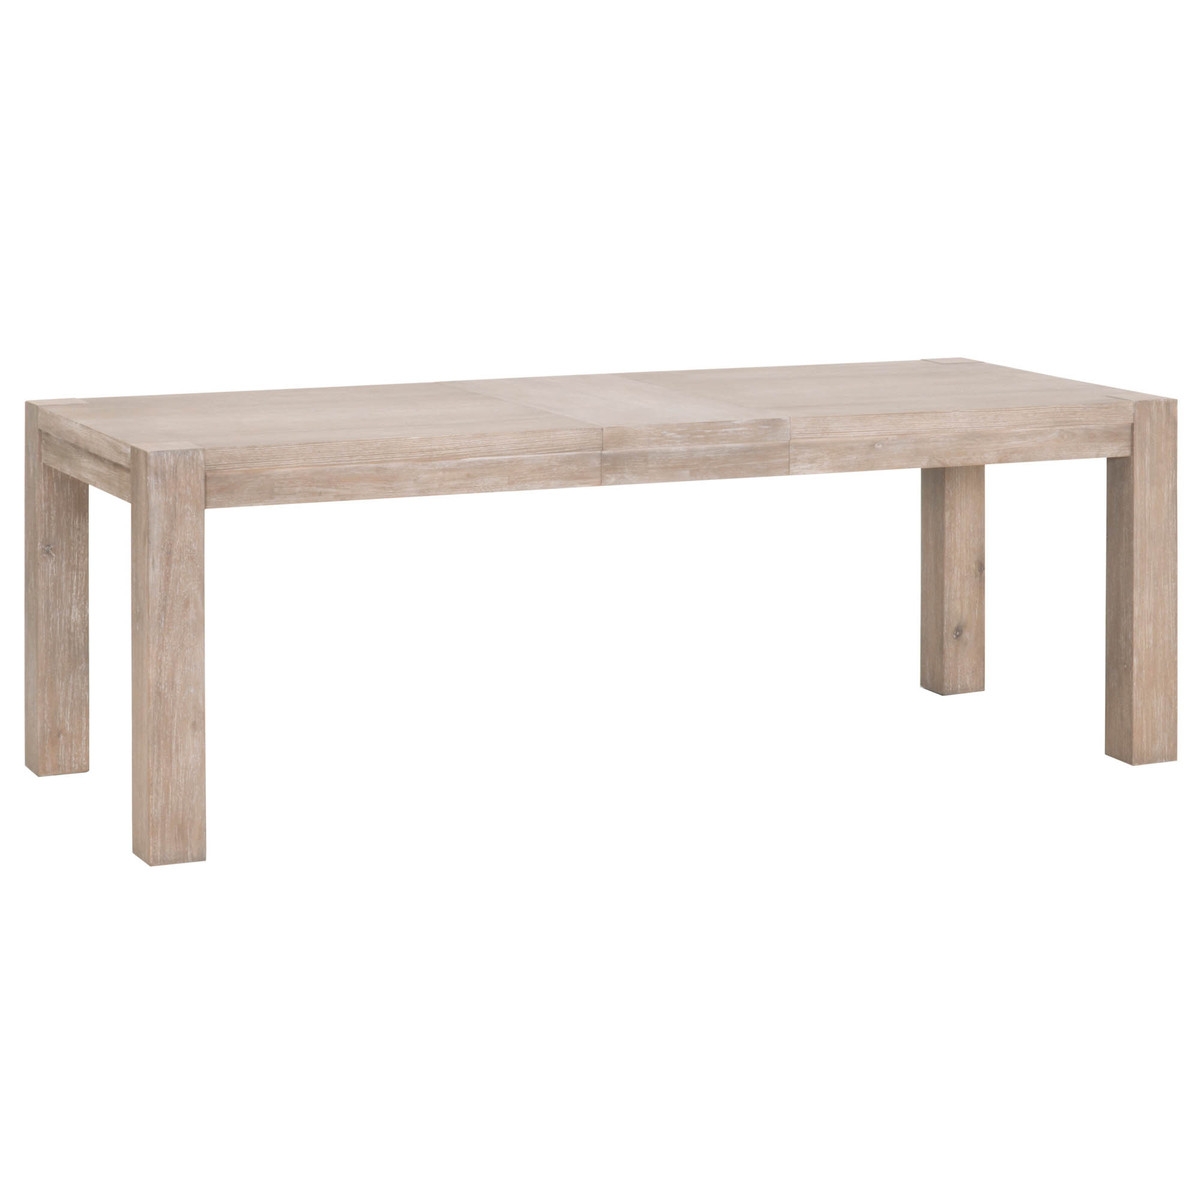 Adler Extension Dining Table - Image 1